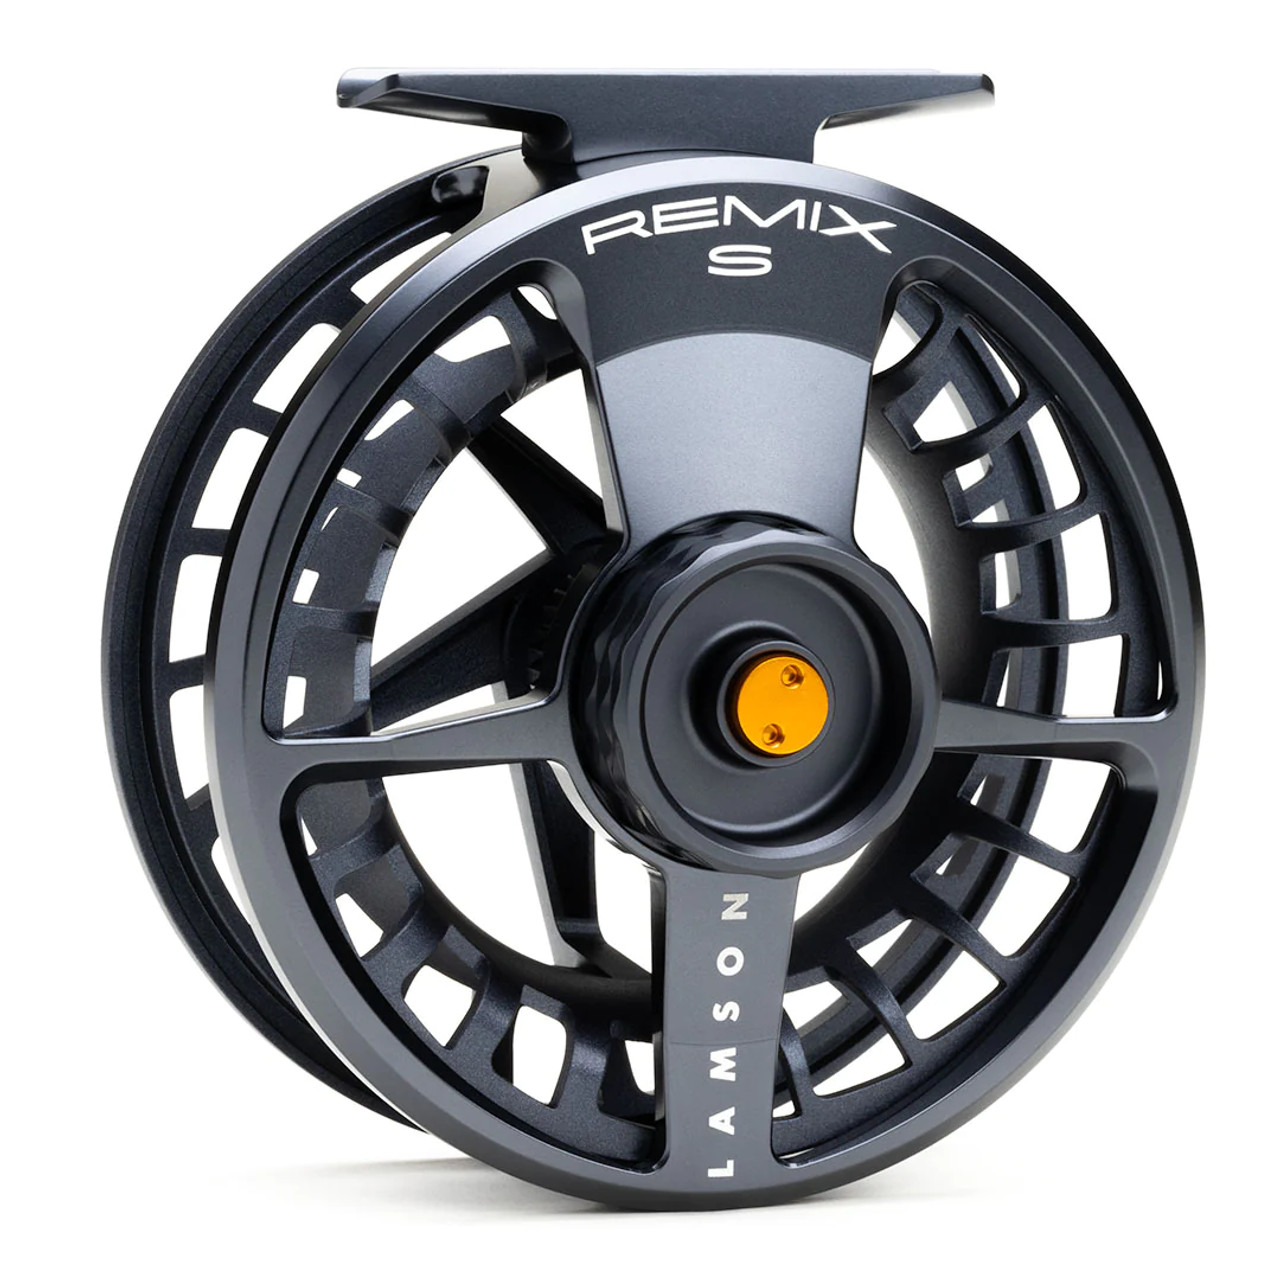 LAMSON REMIX S SERIES FLY REEL - FRED'S CUSTOM TACKLE